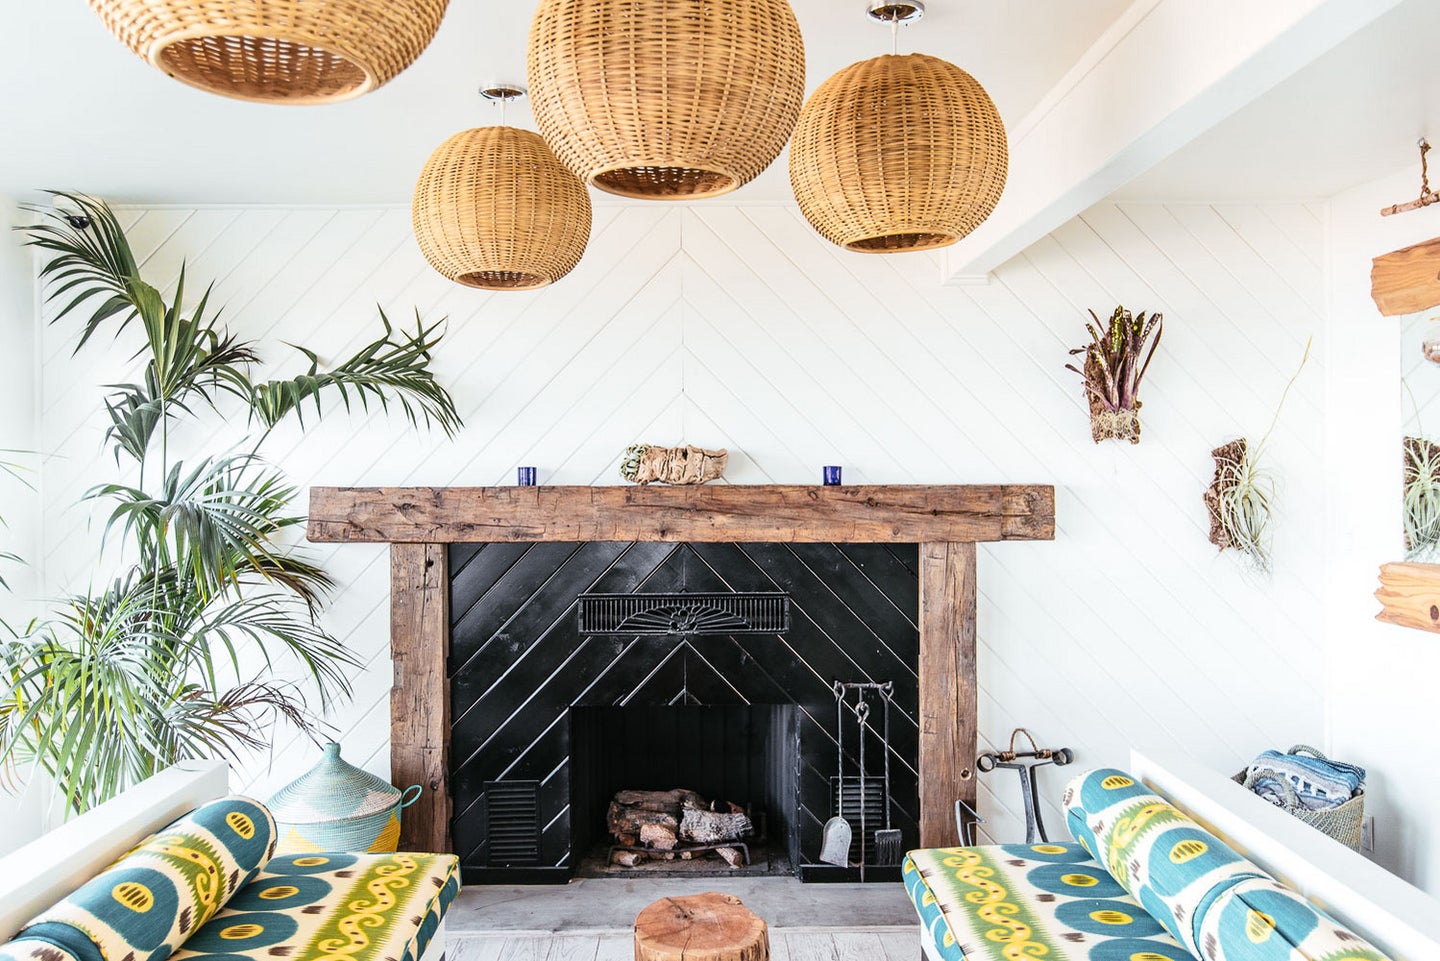 How to Make Your Home Look Like a Cool California Beach Lodge in Cambria